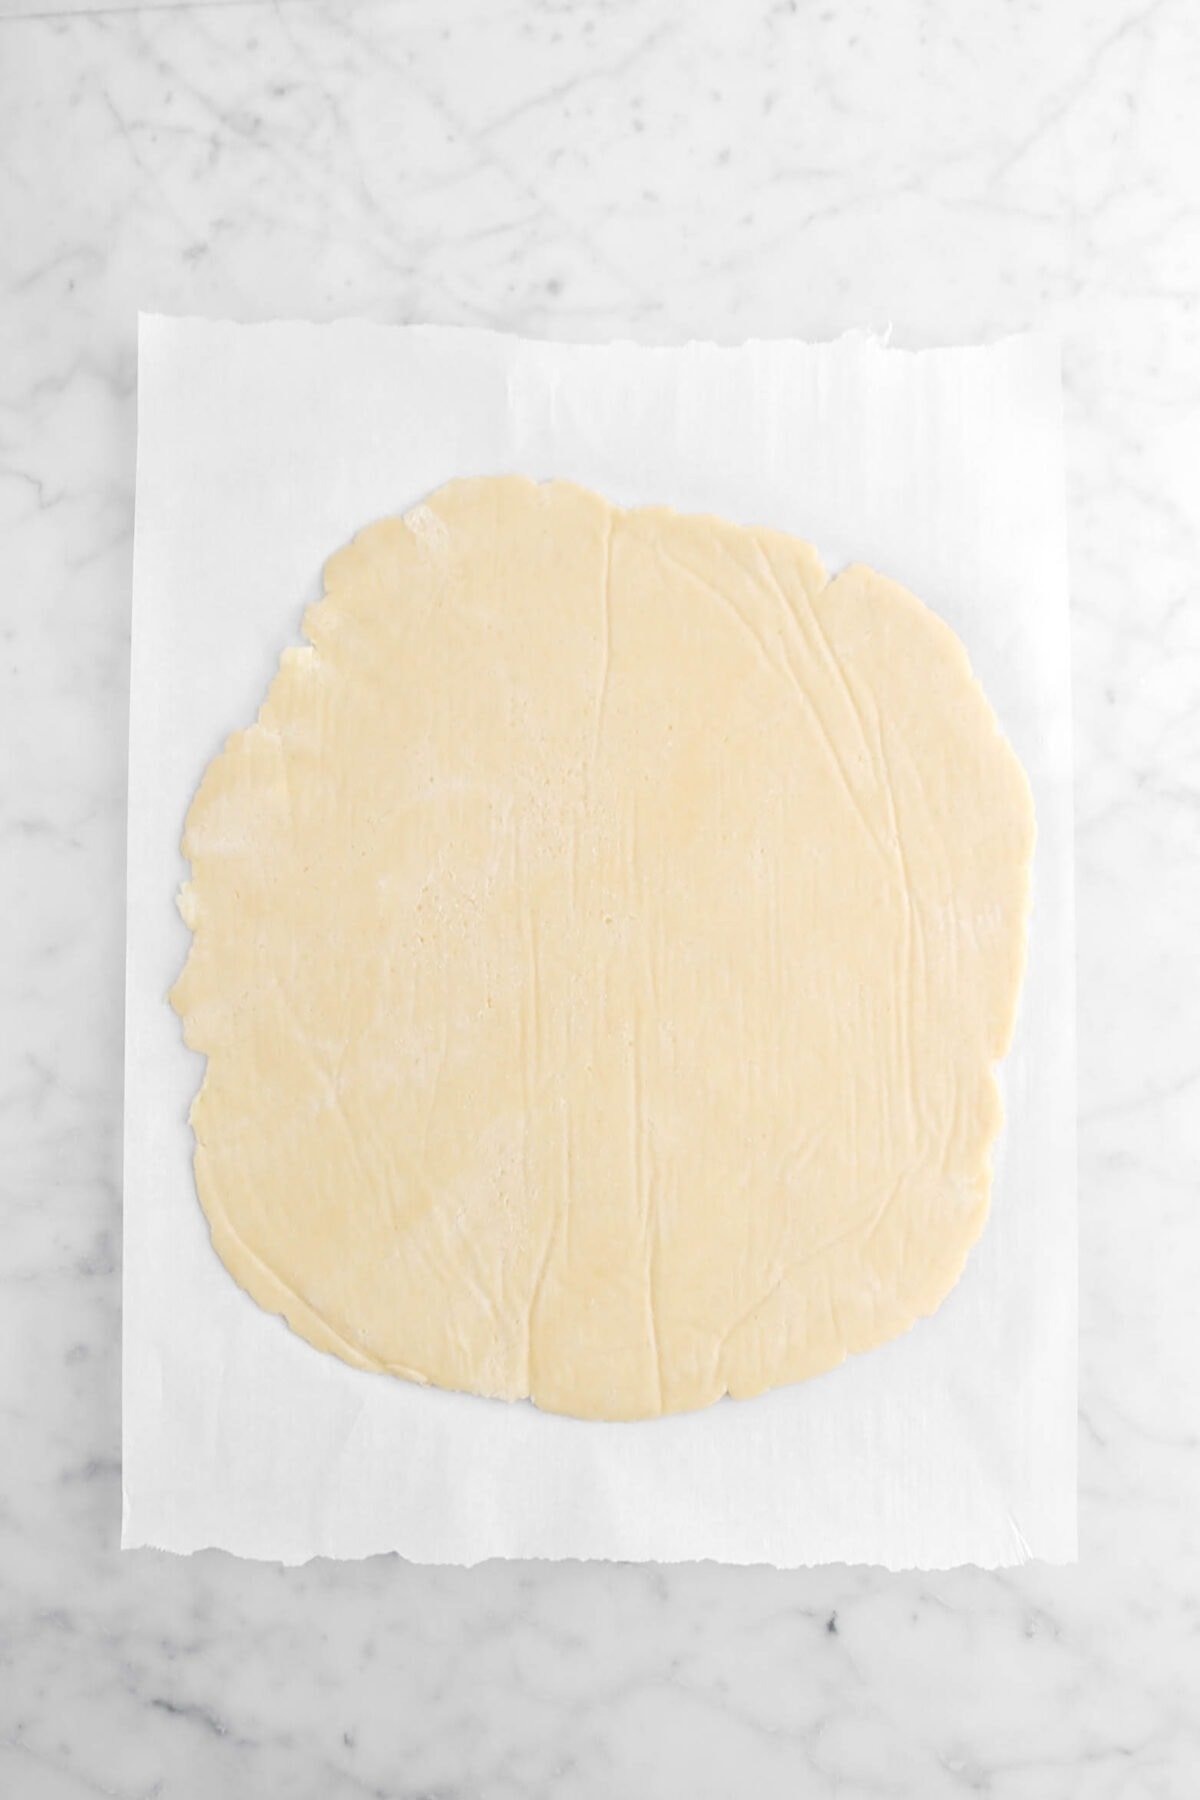 pie dough rolled out on parchment paper.